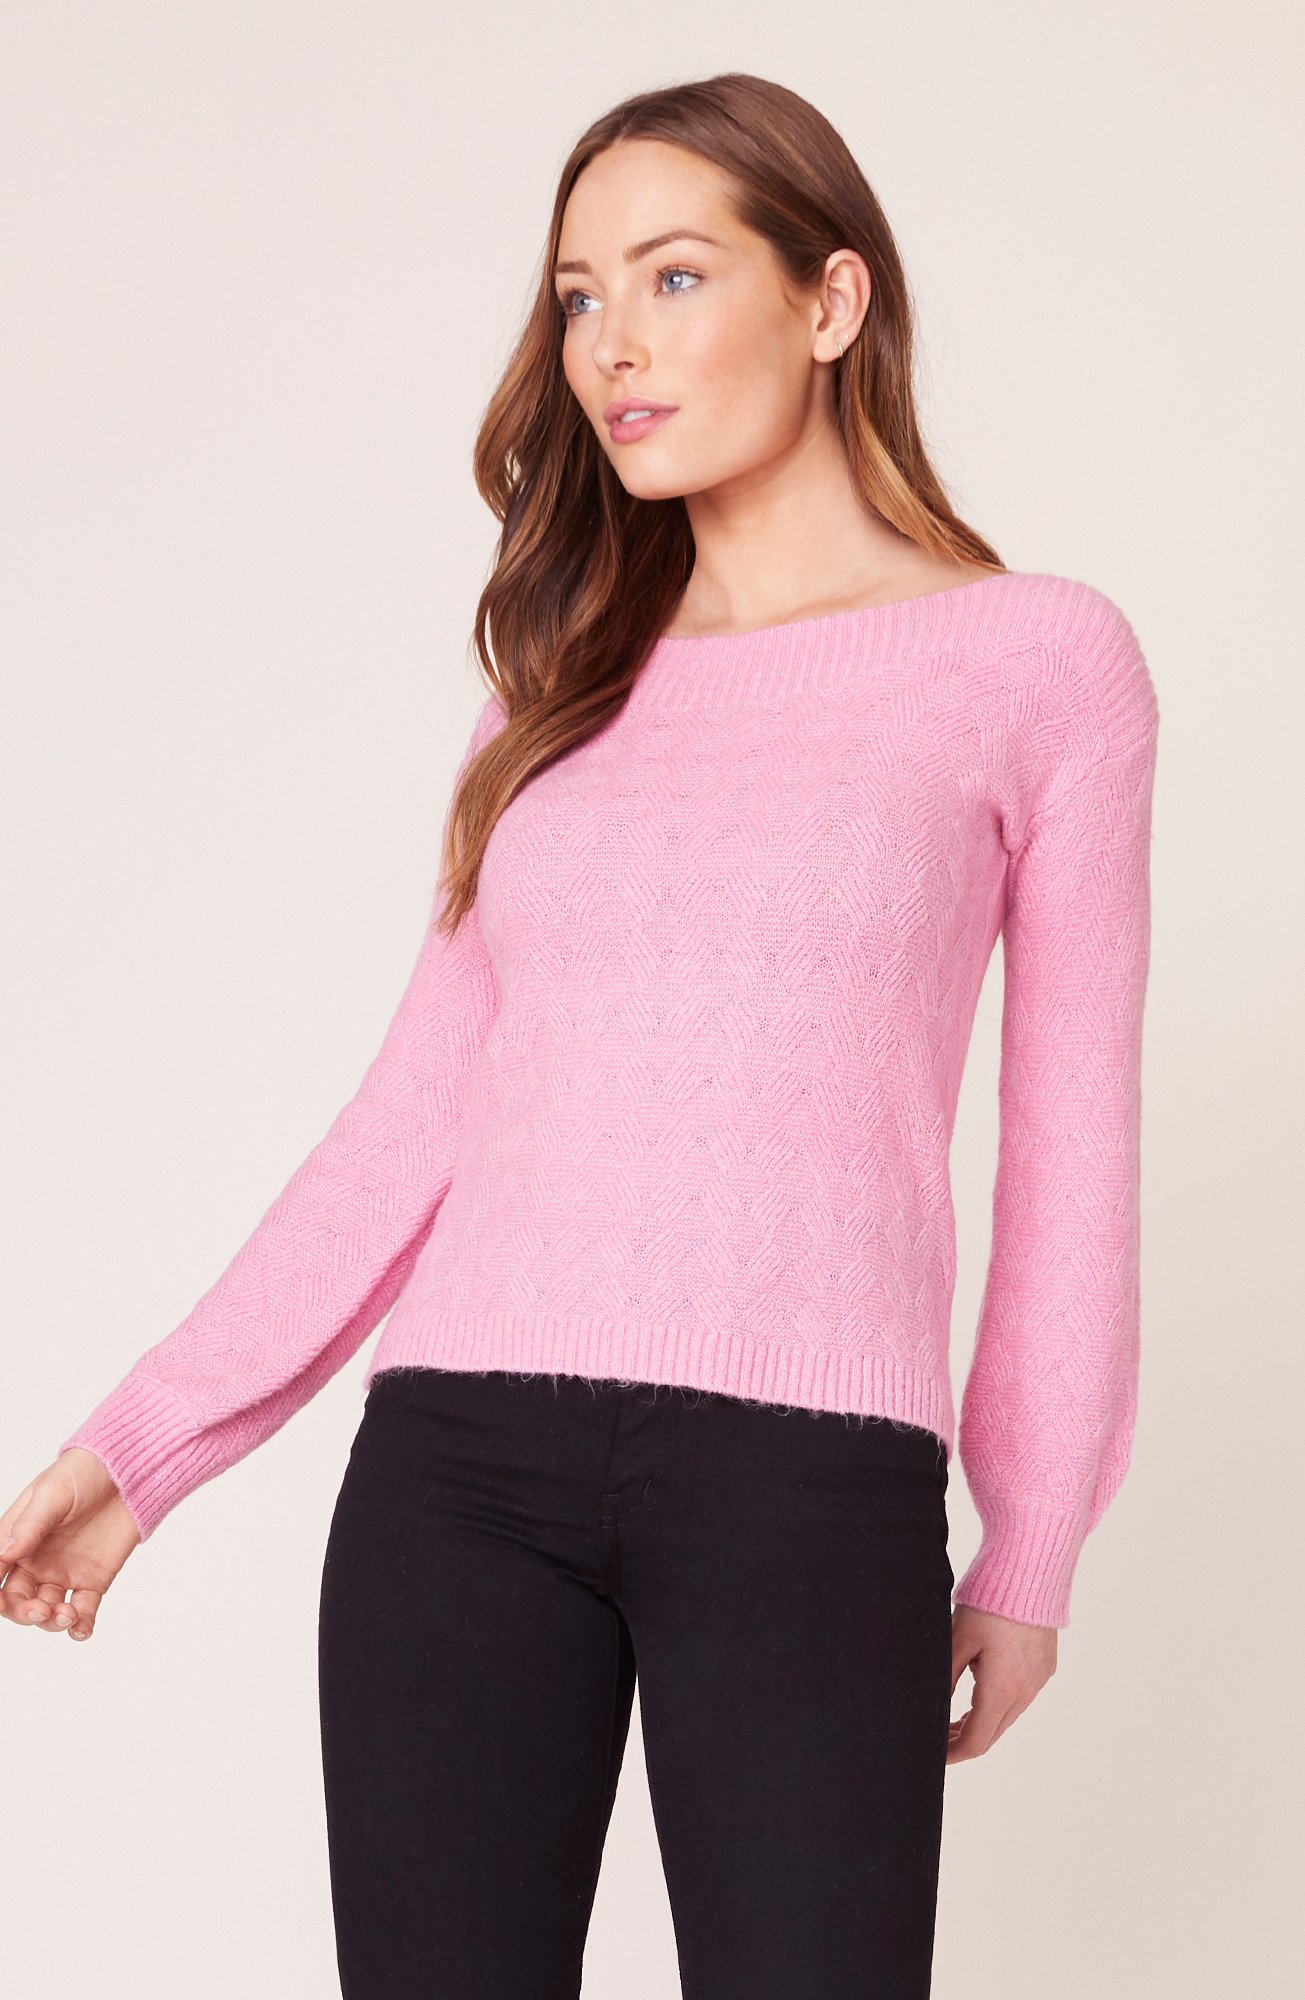 3 Ways to Wear a Pink Sweater For Fall - My Closet Edit